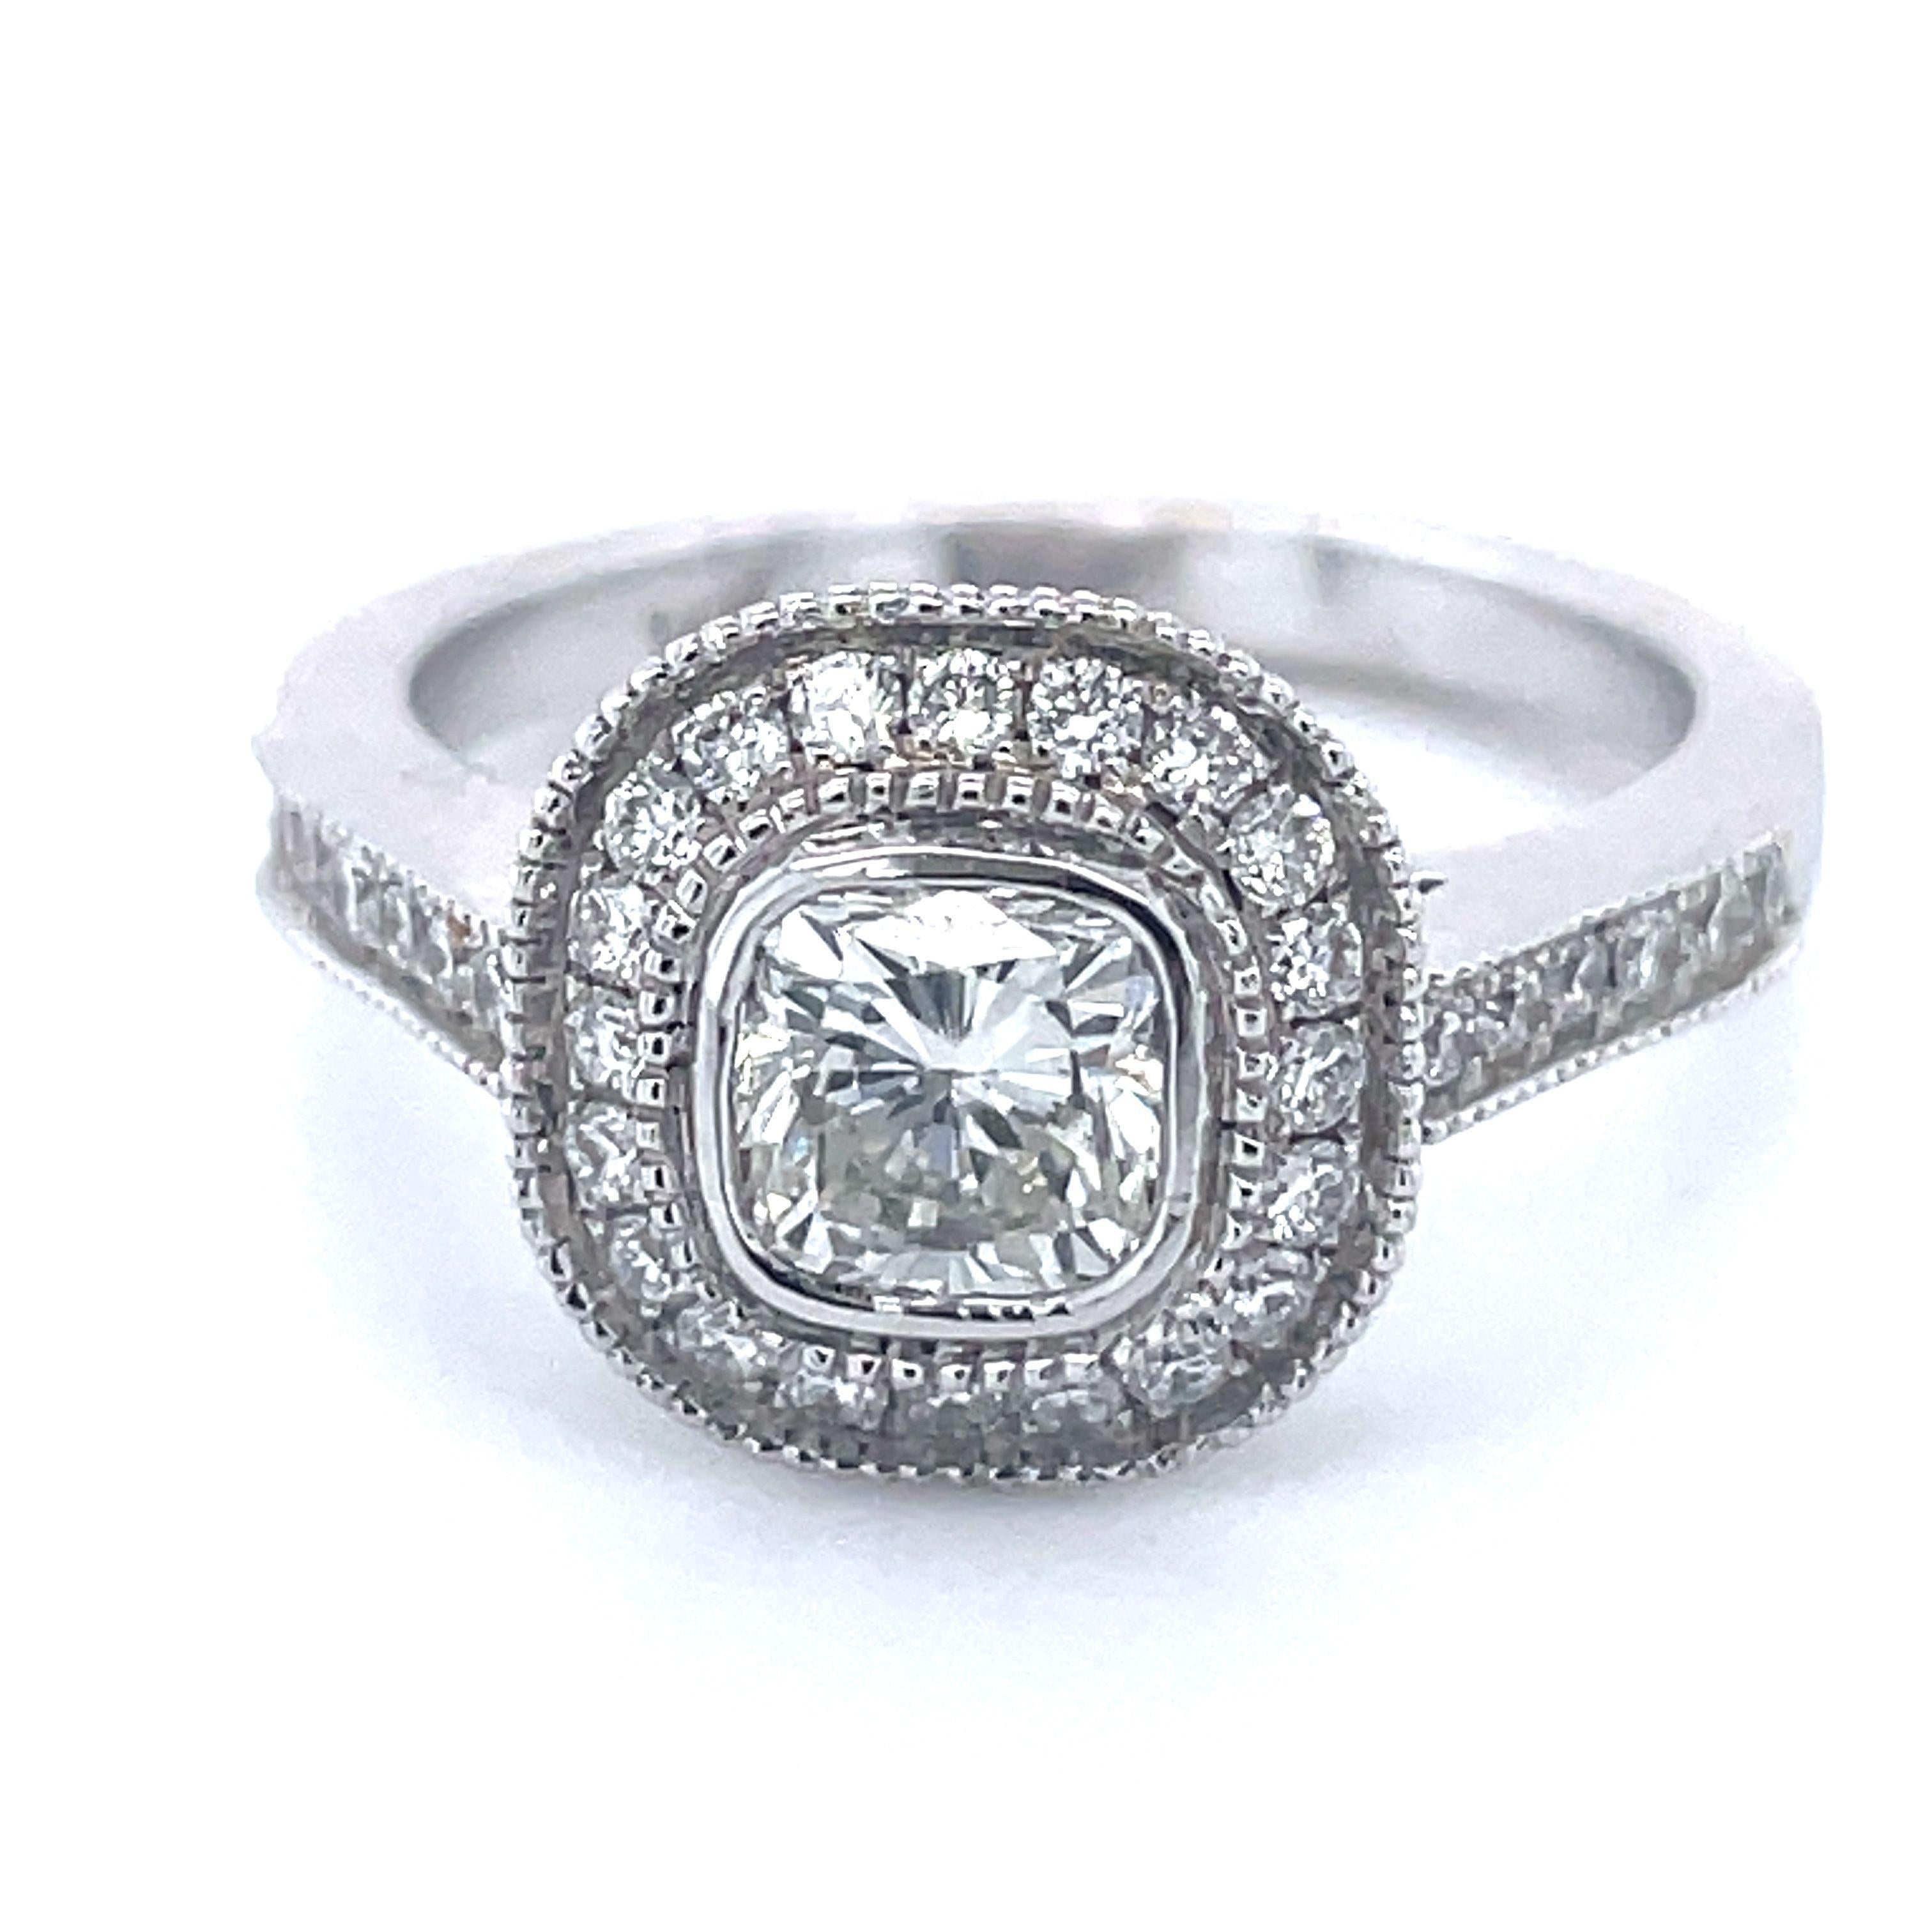 One Of a Kind Engagement Ring 0.82 CT Cushion Shape Natural Diamond, Solid 14k White Gold, Halo Diamond Ring 
 
~~ S e t t i n g ~~
Solid 14k White Gold
3.8 grams
Ring Size 5 US
 
~~ Stones ~~
Main Stone:
Cushion Shape Natural Diamond In Weight Of